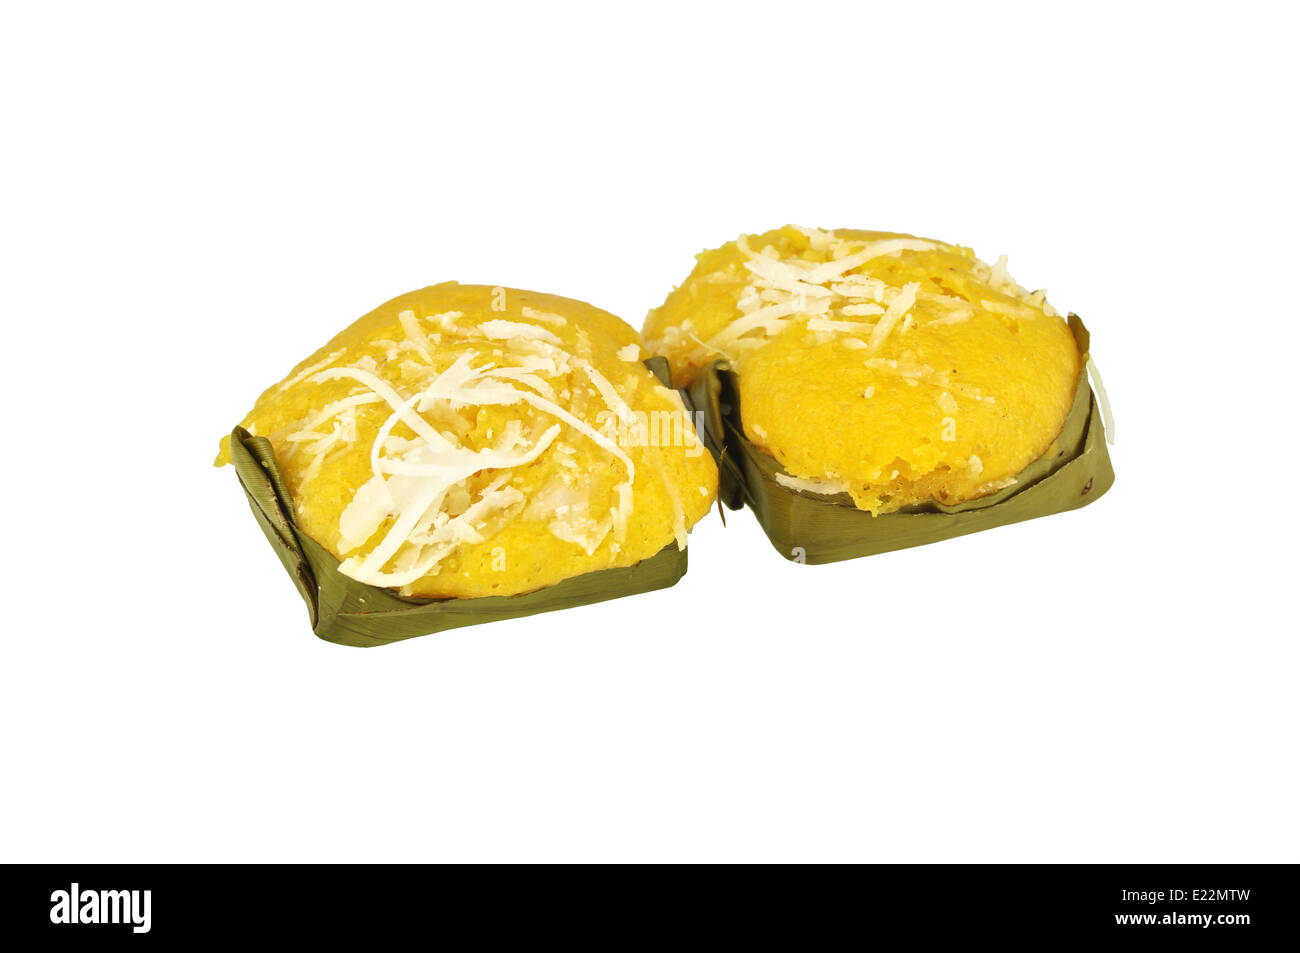 Steamed toddy palm cake in banana leaf isolated on white background. Stock Photo